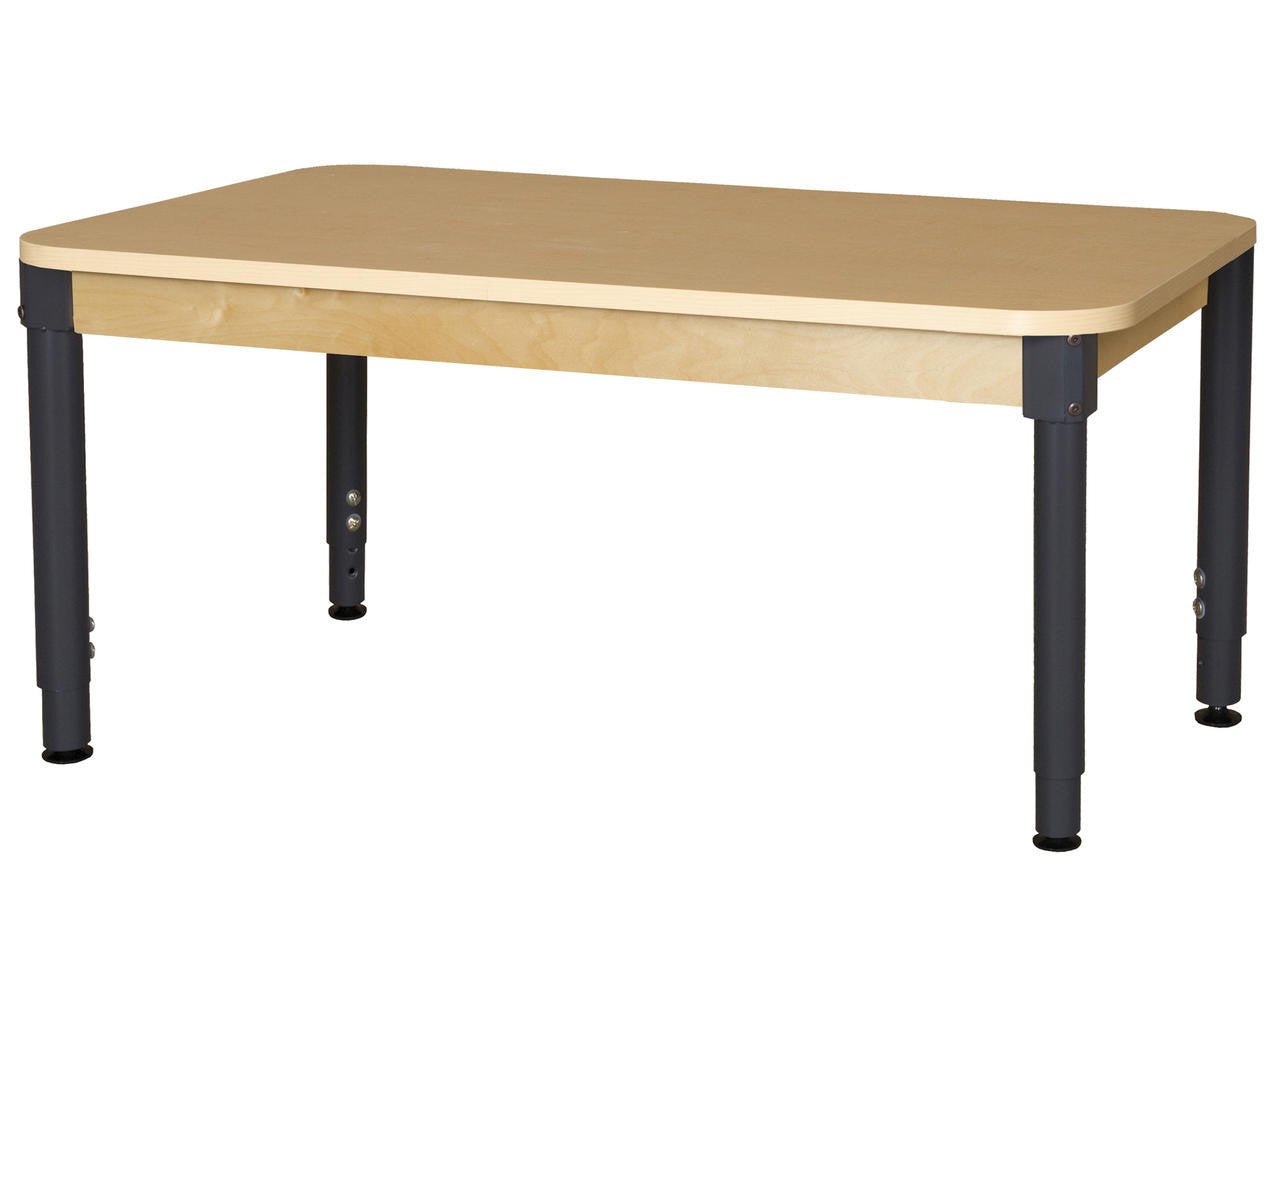 Rectangle High Pressure Laminate Table with Adjustable Legs 18